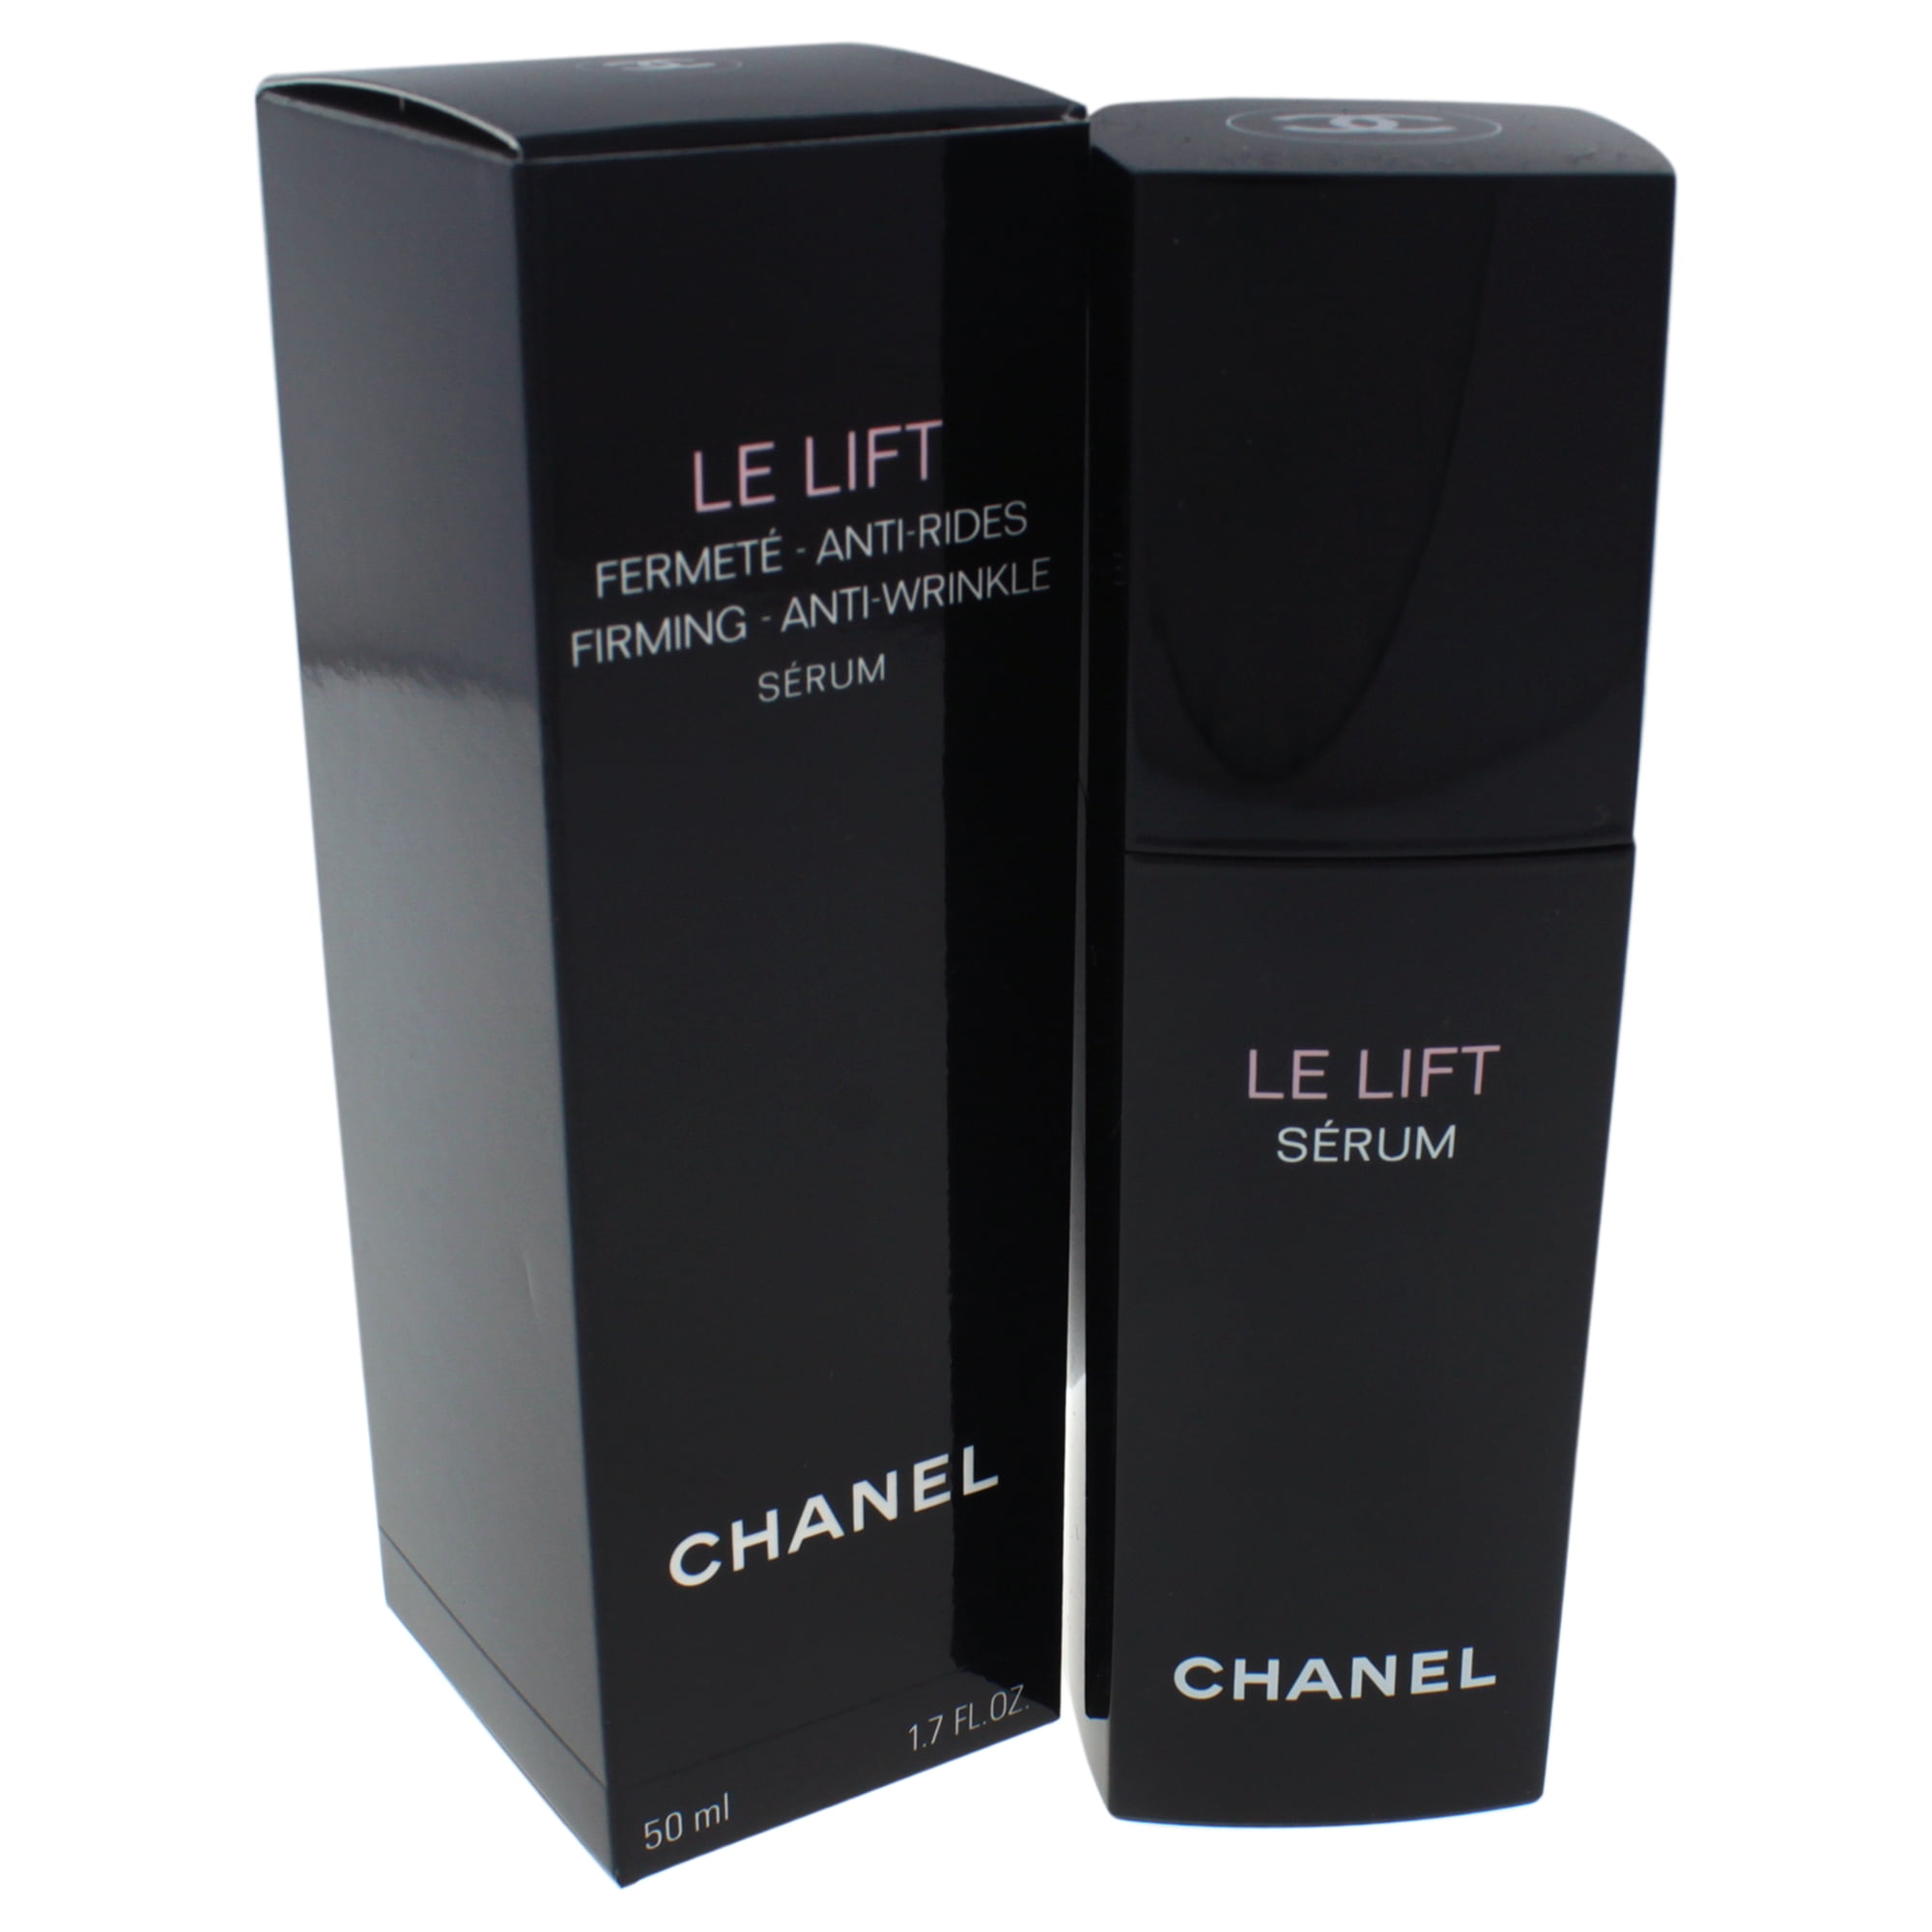 .com : Chanel Le Lift Firming Anti-Wrinkle Skin-Recovery